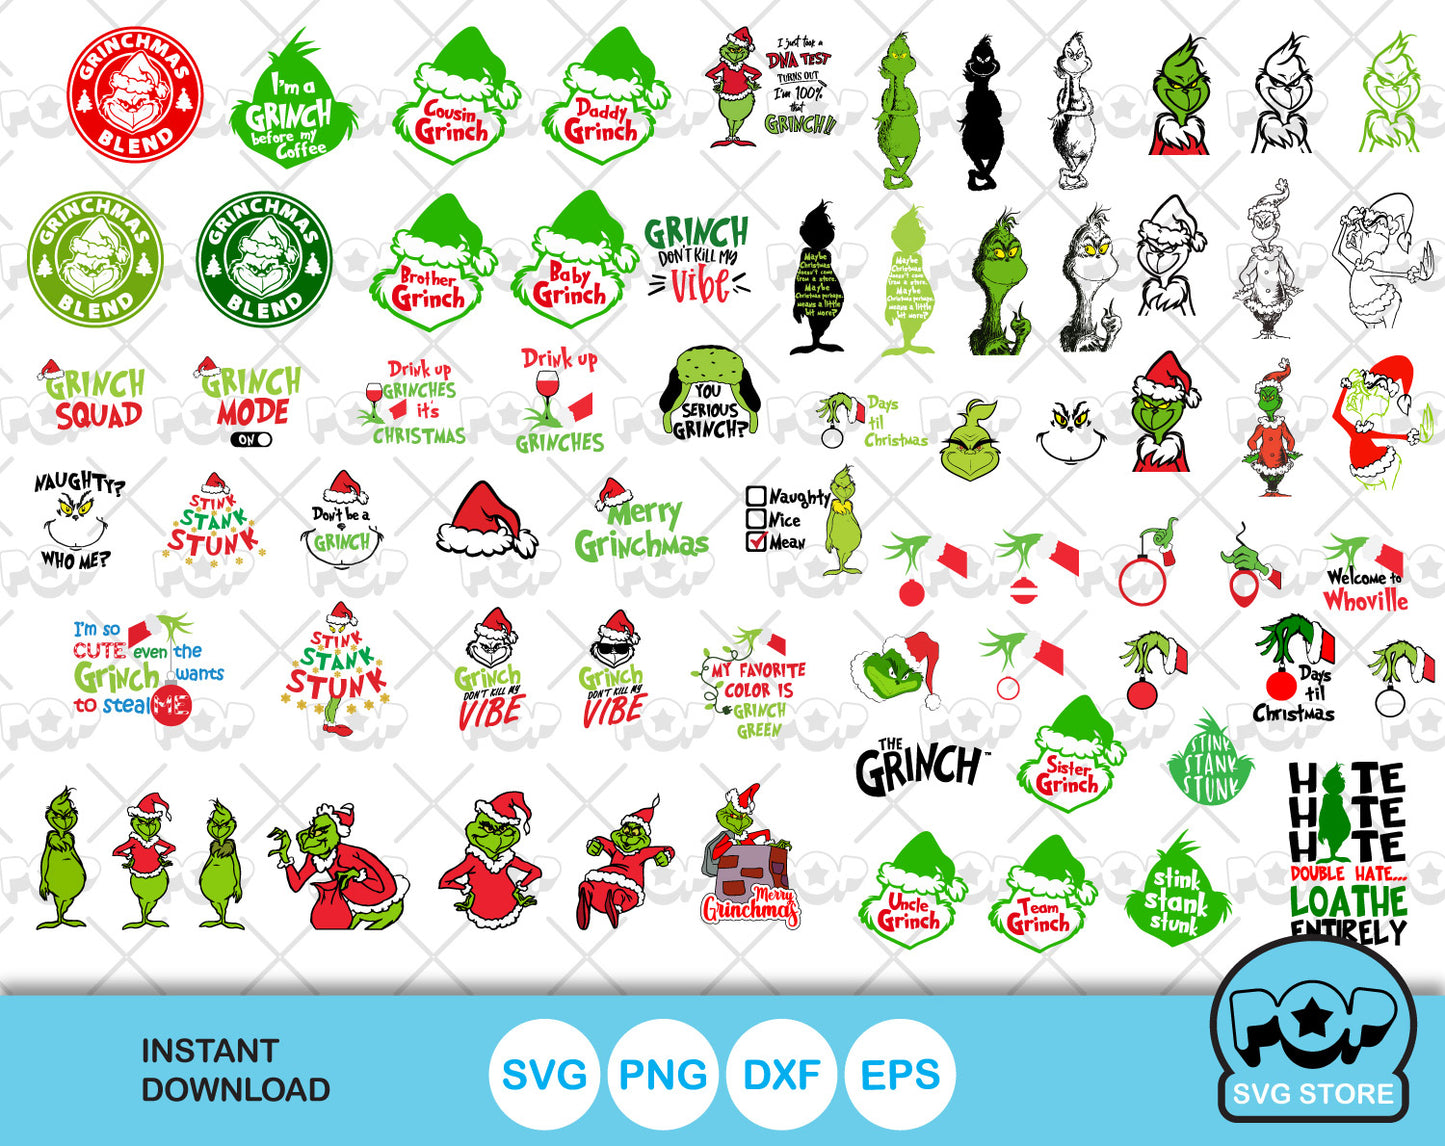 The Grinch 500+ cliparts bundle, Grinch Christmas SVG cut files for Cricut / Silhouette, Christmas cliparts, instant download